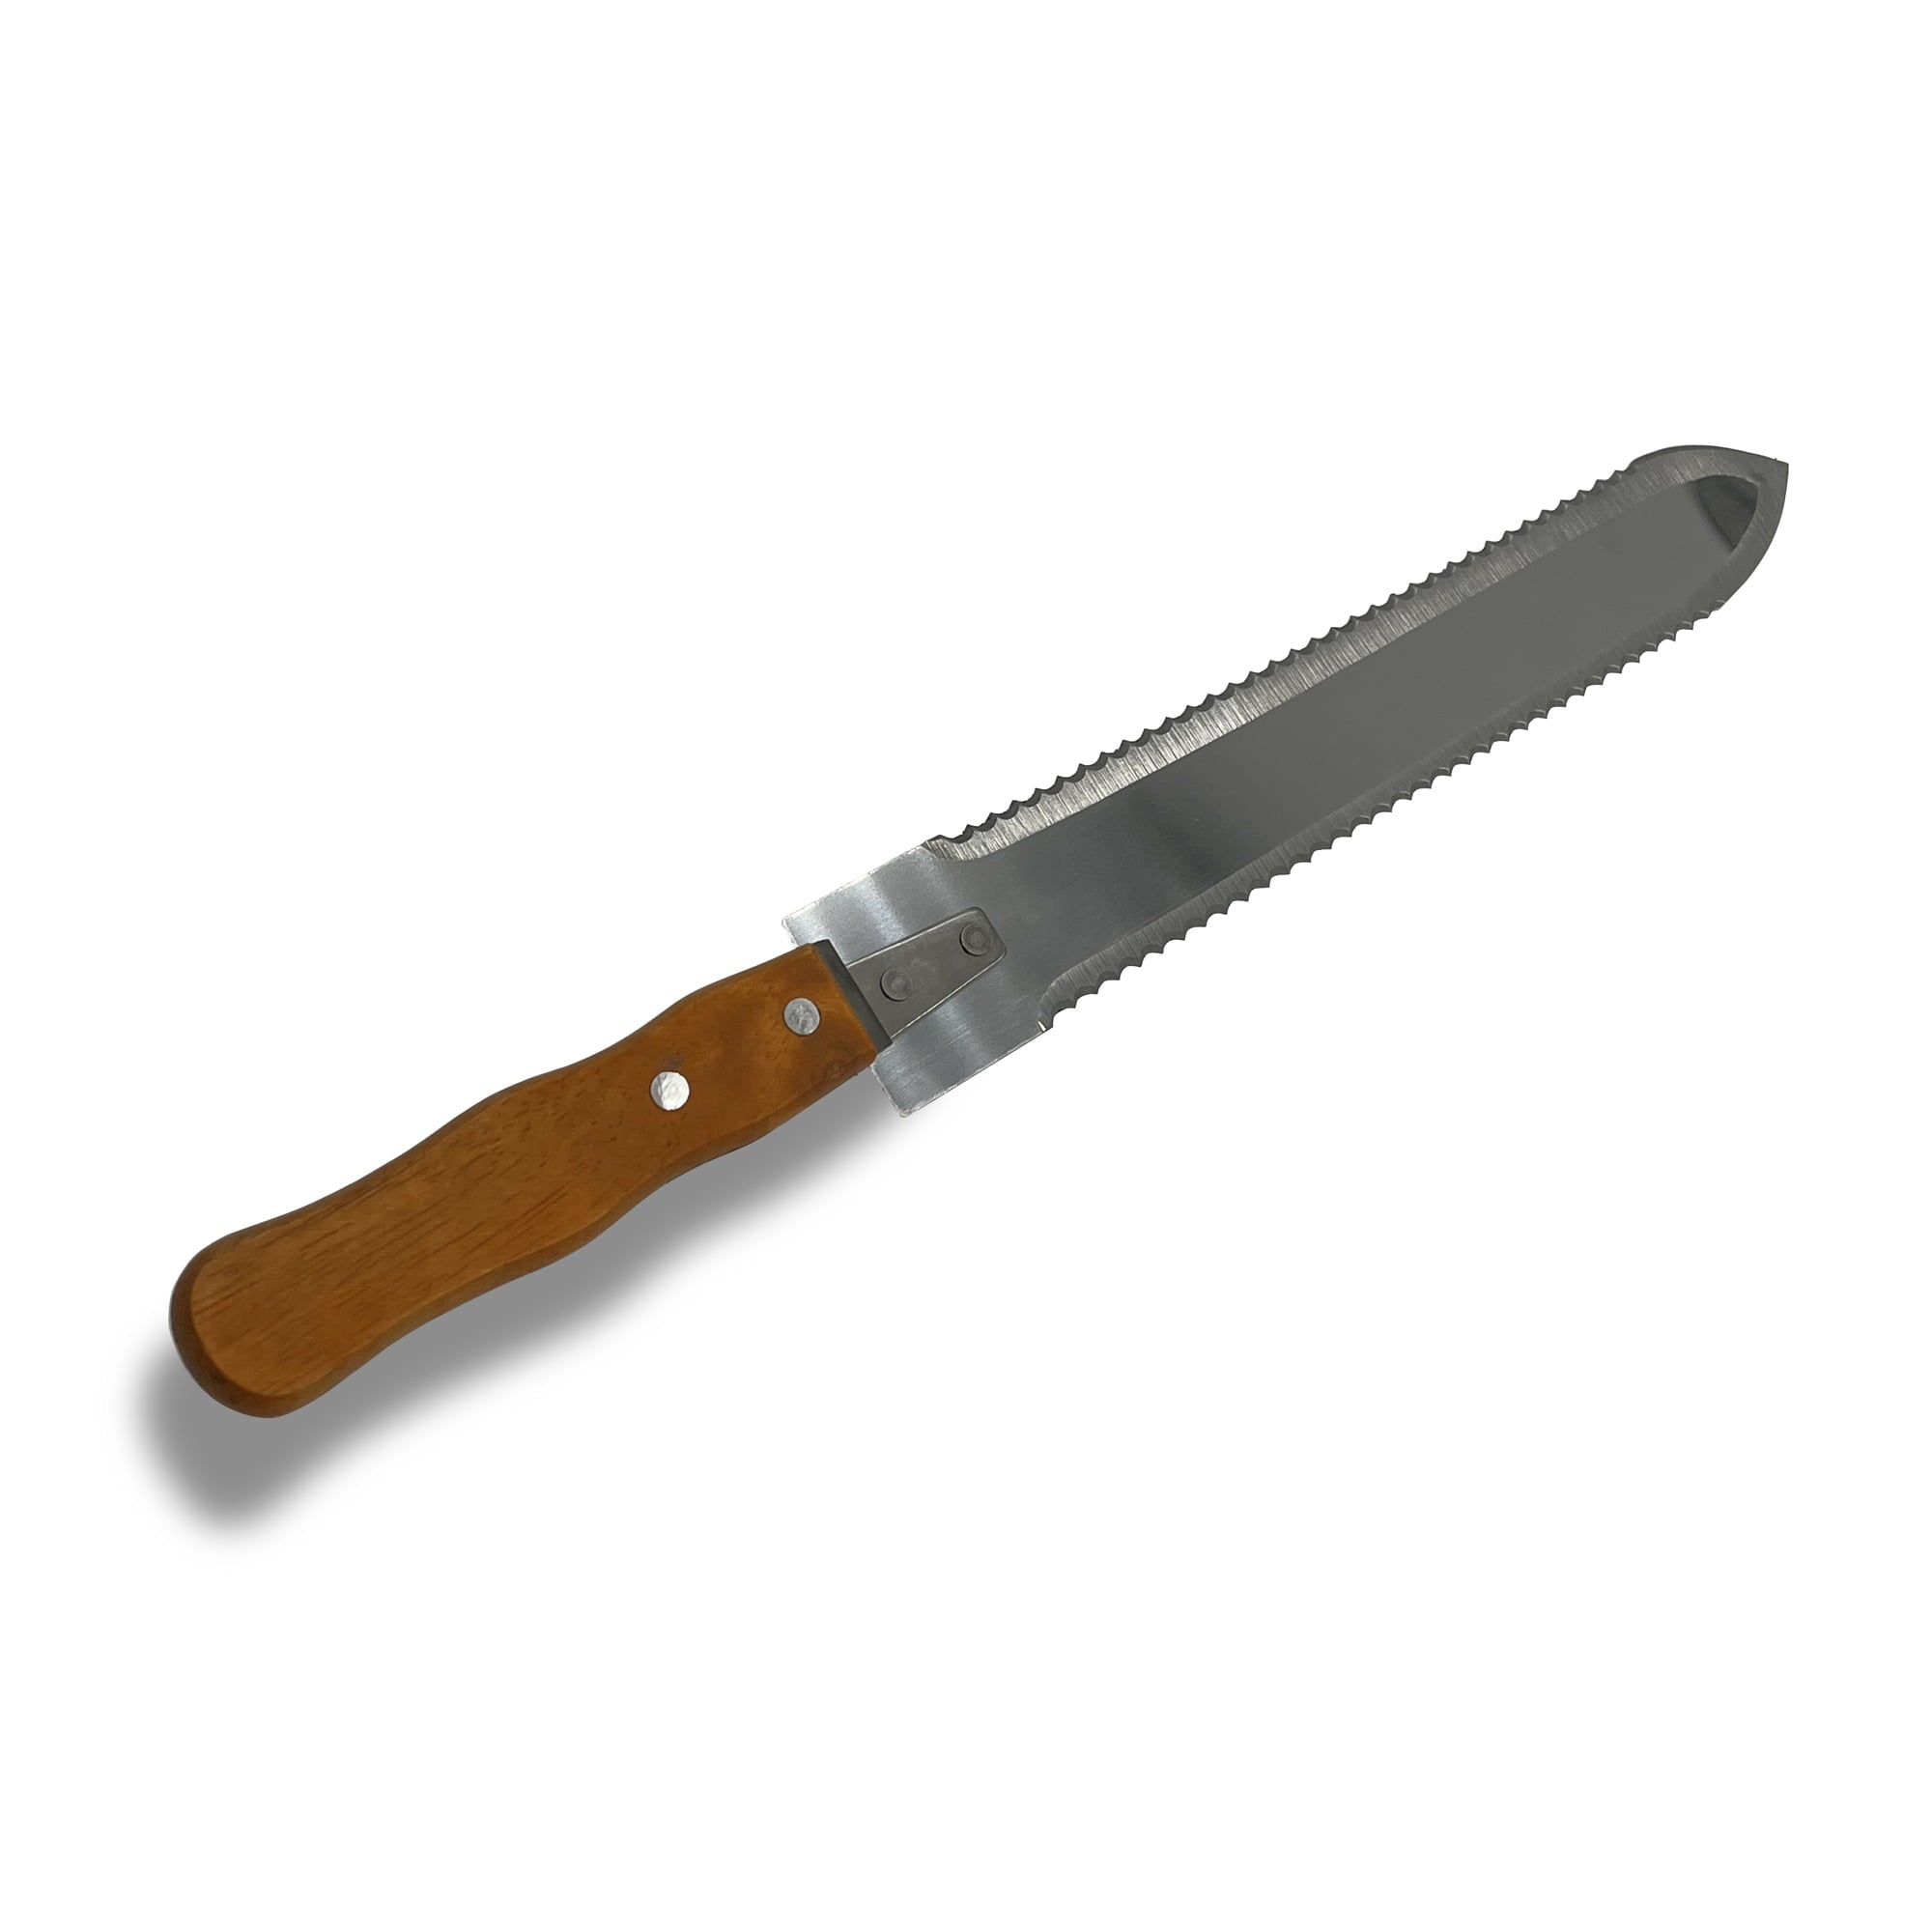 Serrated (Cold) Uncapping Knife for beekeeping